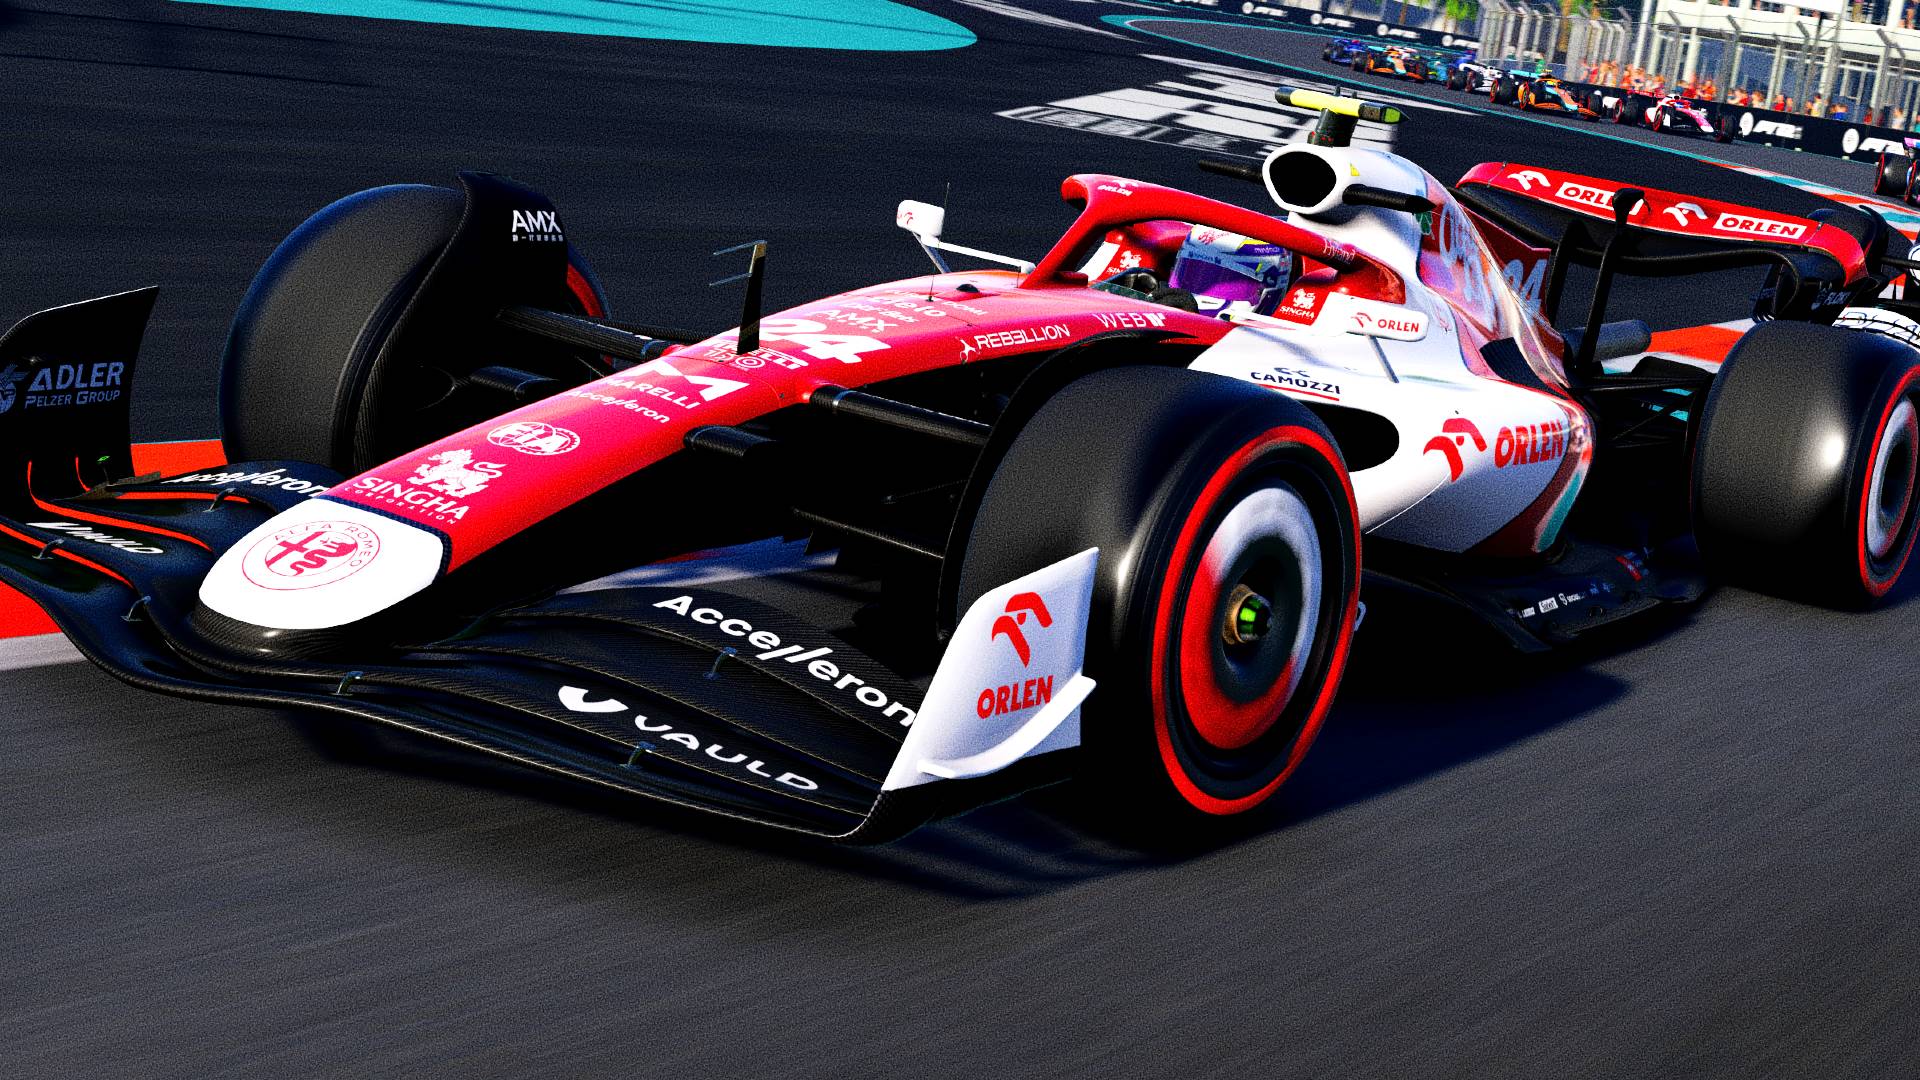 Best racing games: a F1 car on the grid in F1 22